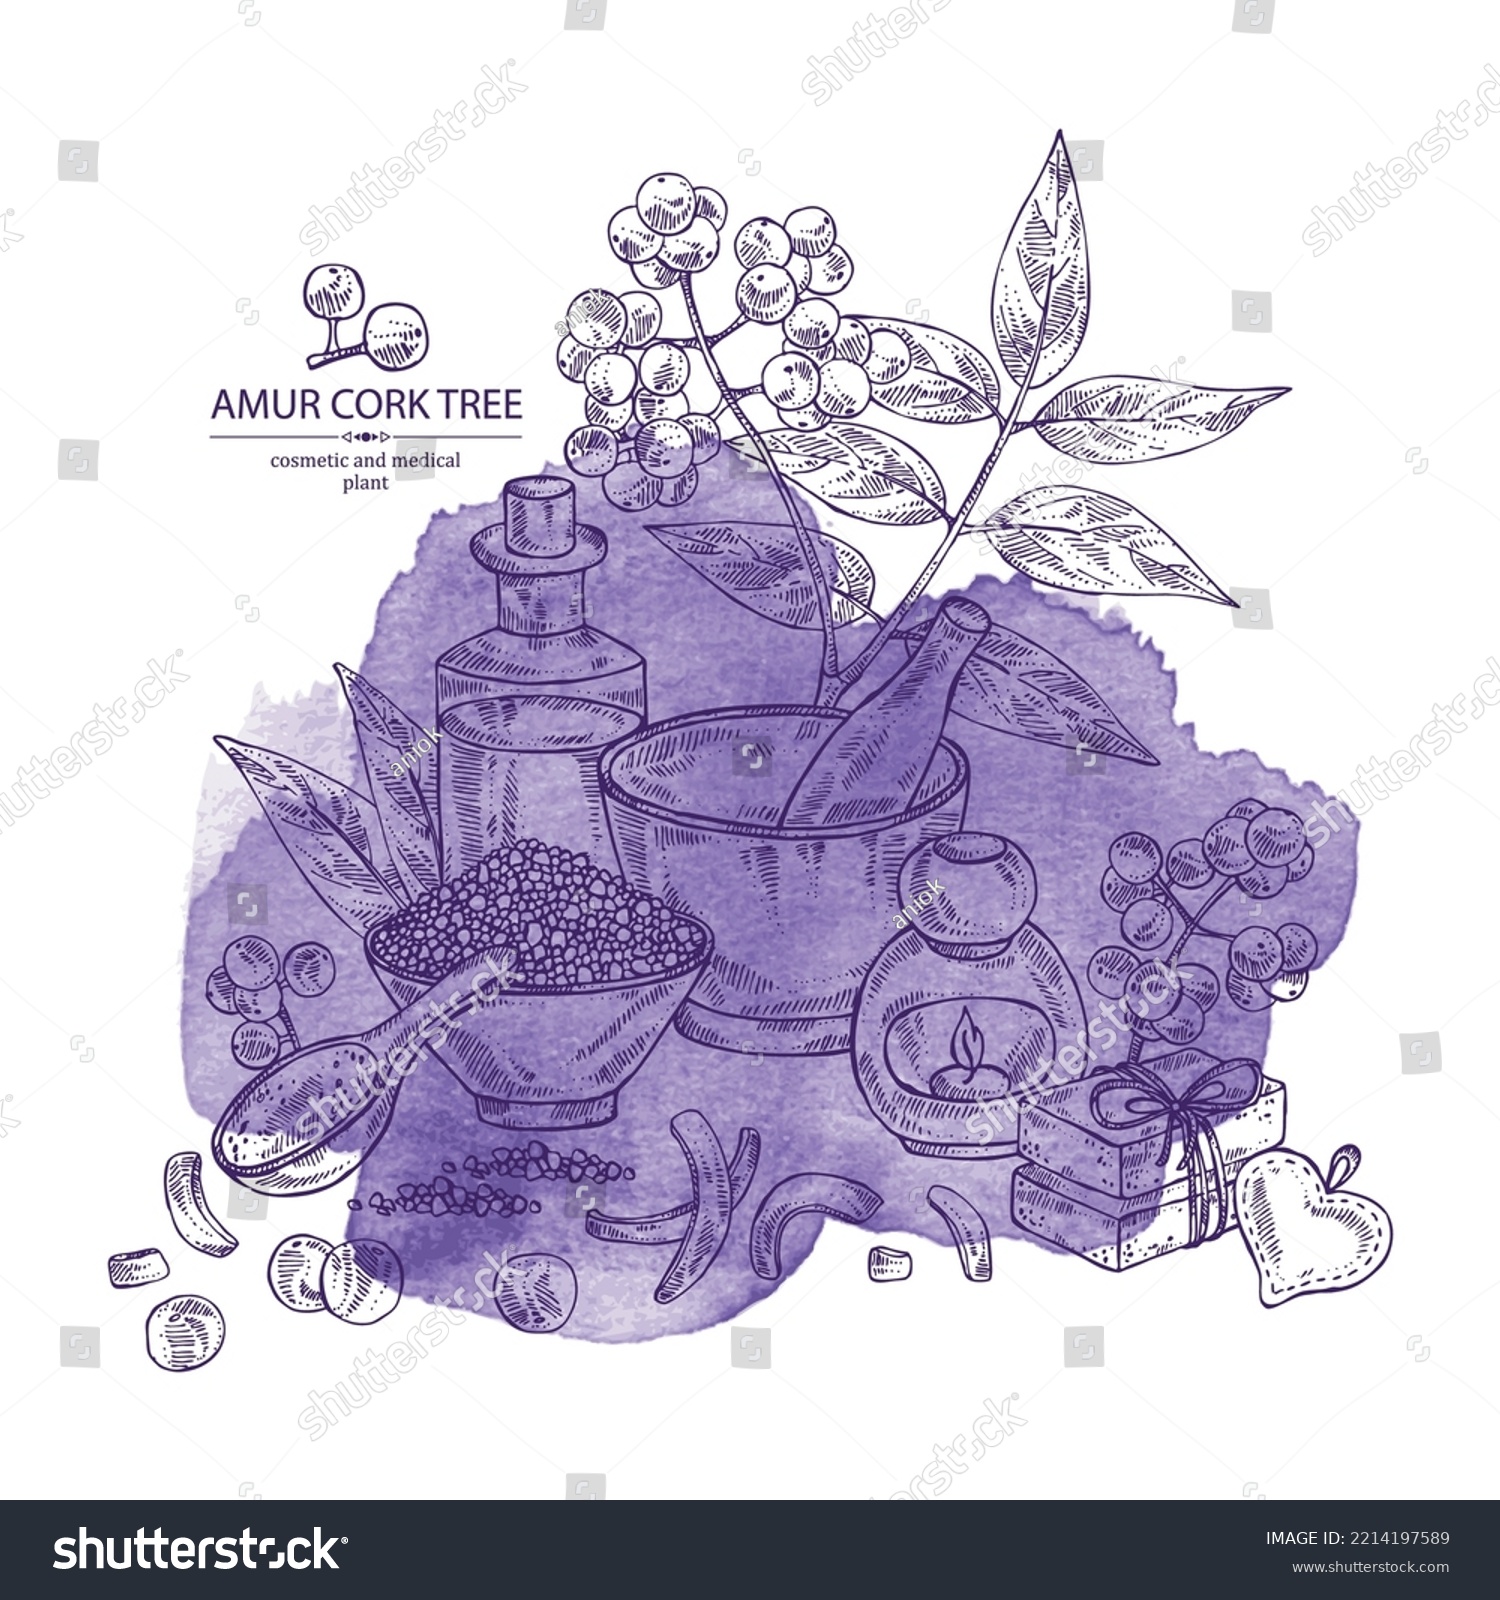 SVG of Watercolor background with  amur cork tree: amur cork berries, plant and amur cork tree bark. Phellodendron amurense. Oil, soap and bath salt . Cosmetics and medical plant. Vector hand drawn illustra svg